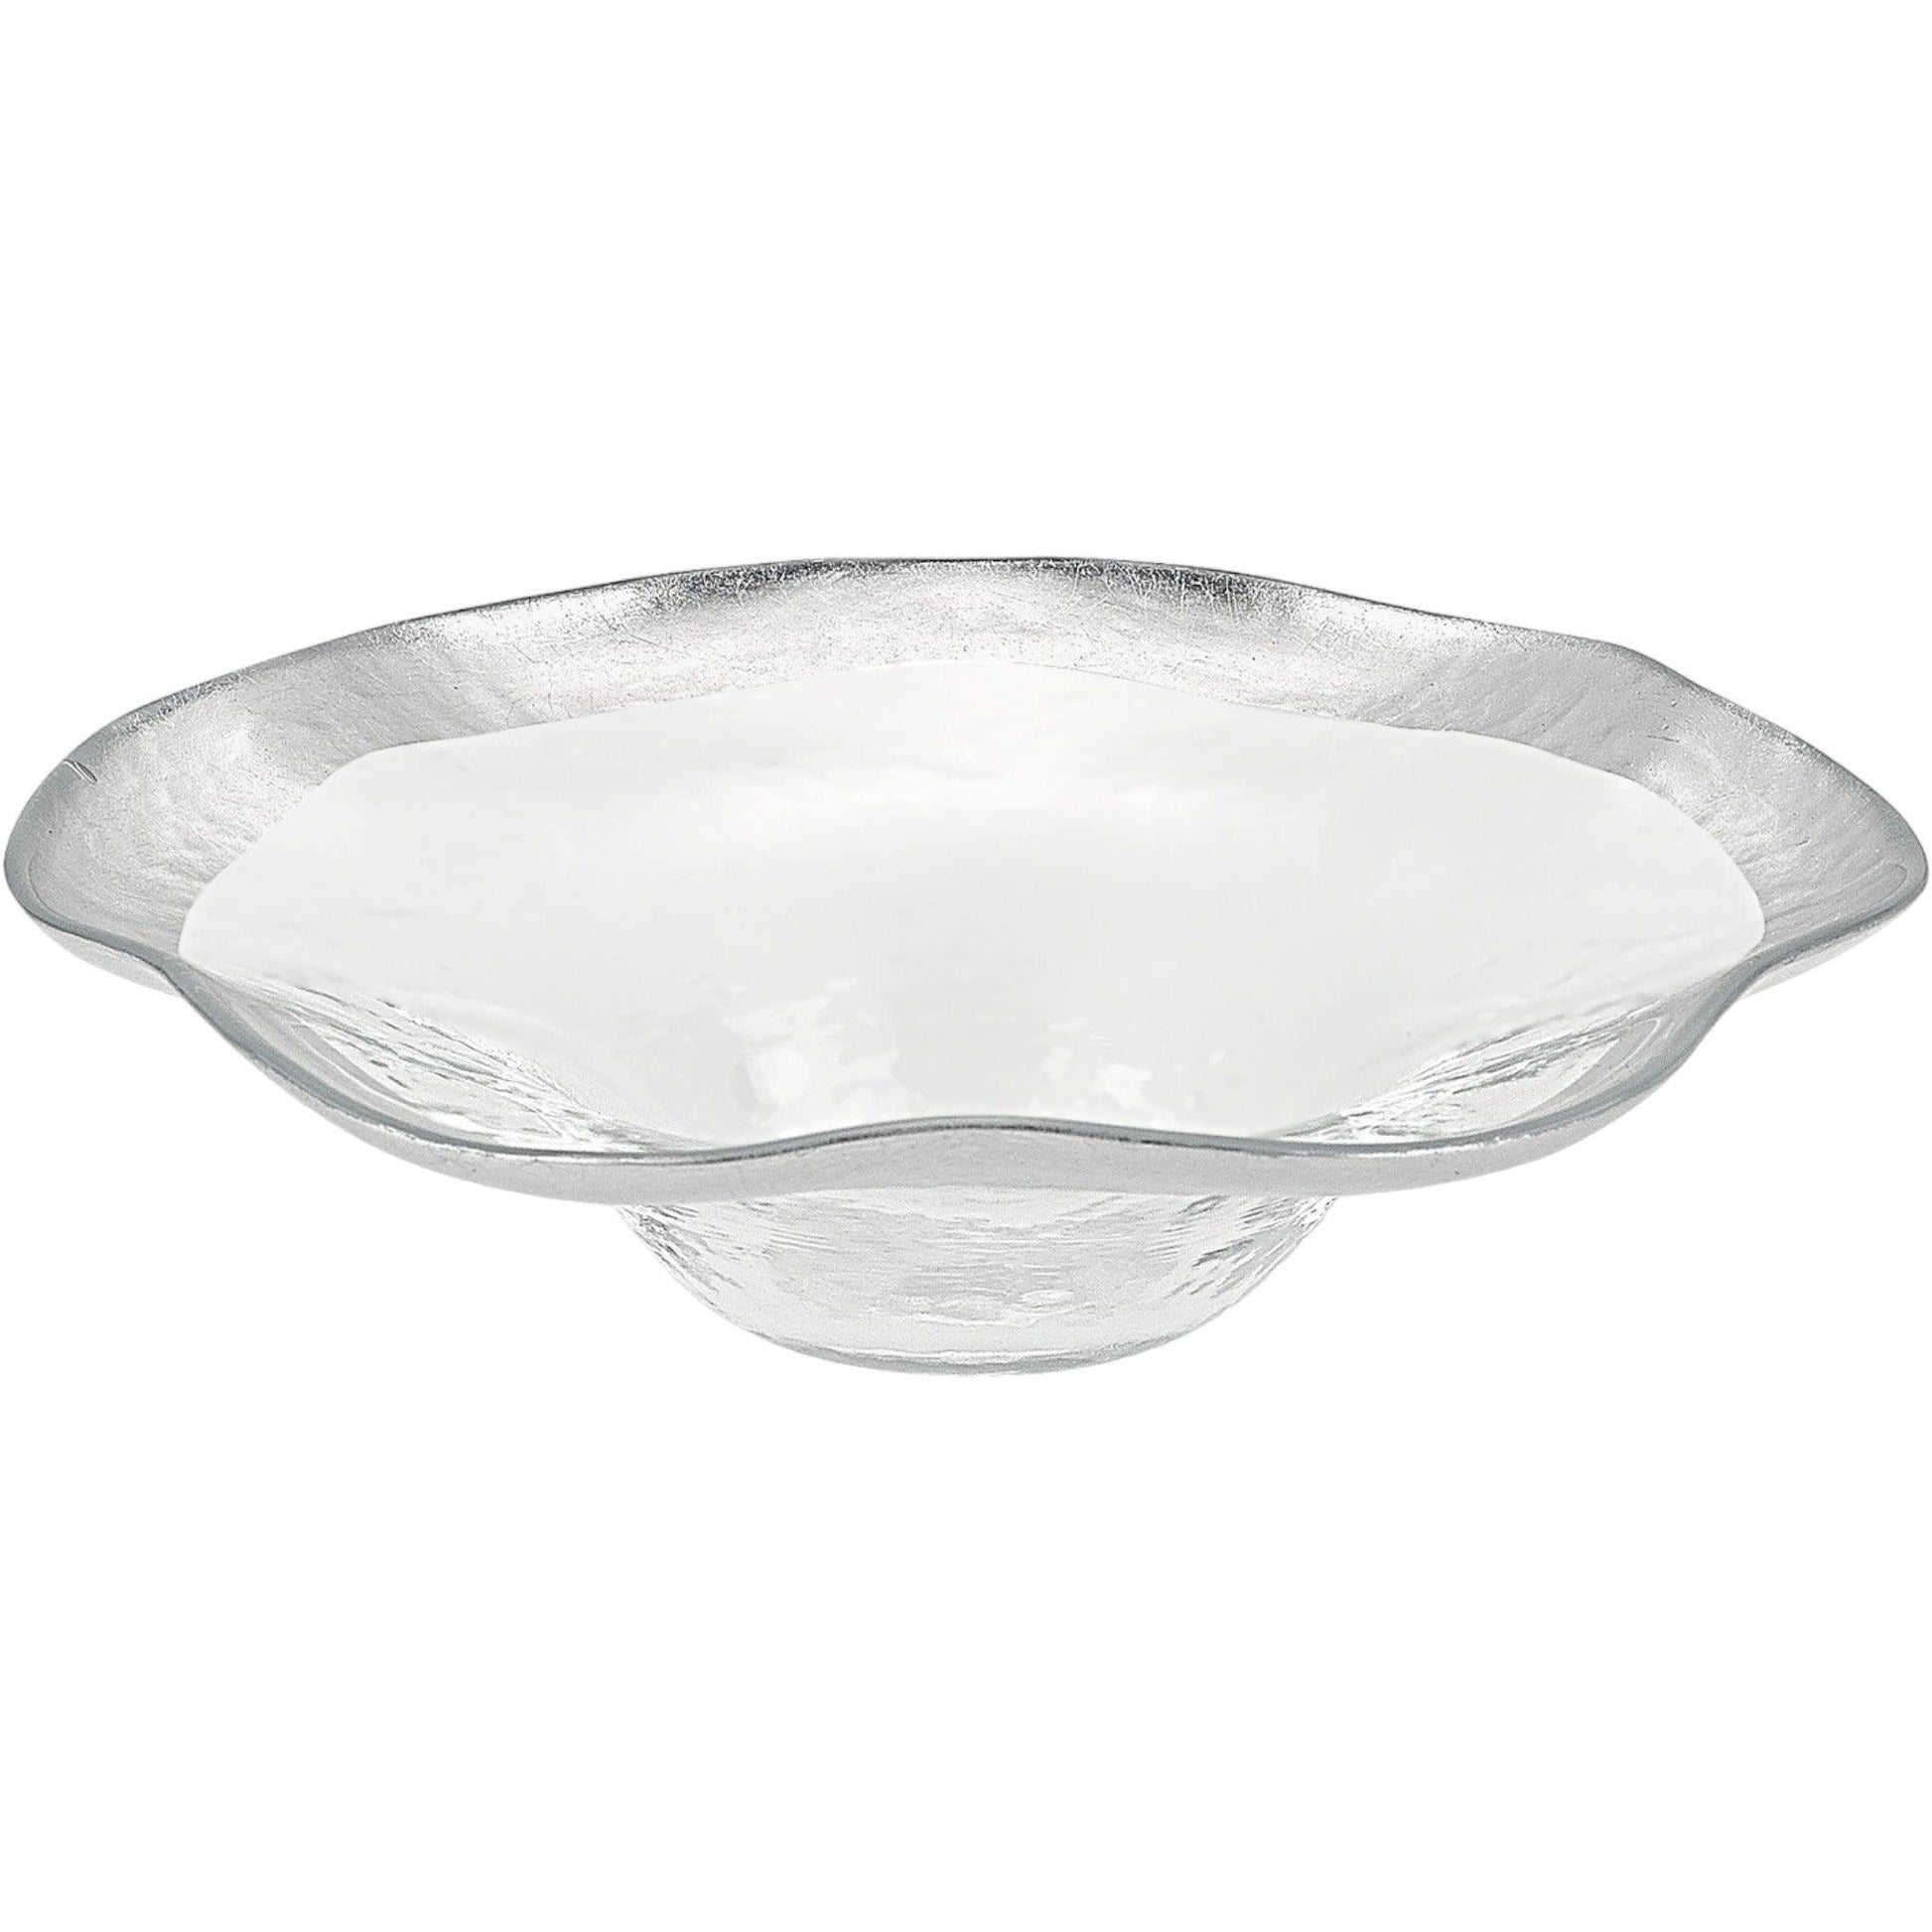 Crystal Glass Wave Bowl with Silver Leaf Pattern - Nature Home Decor